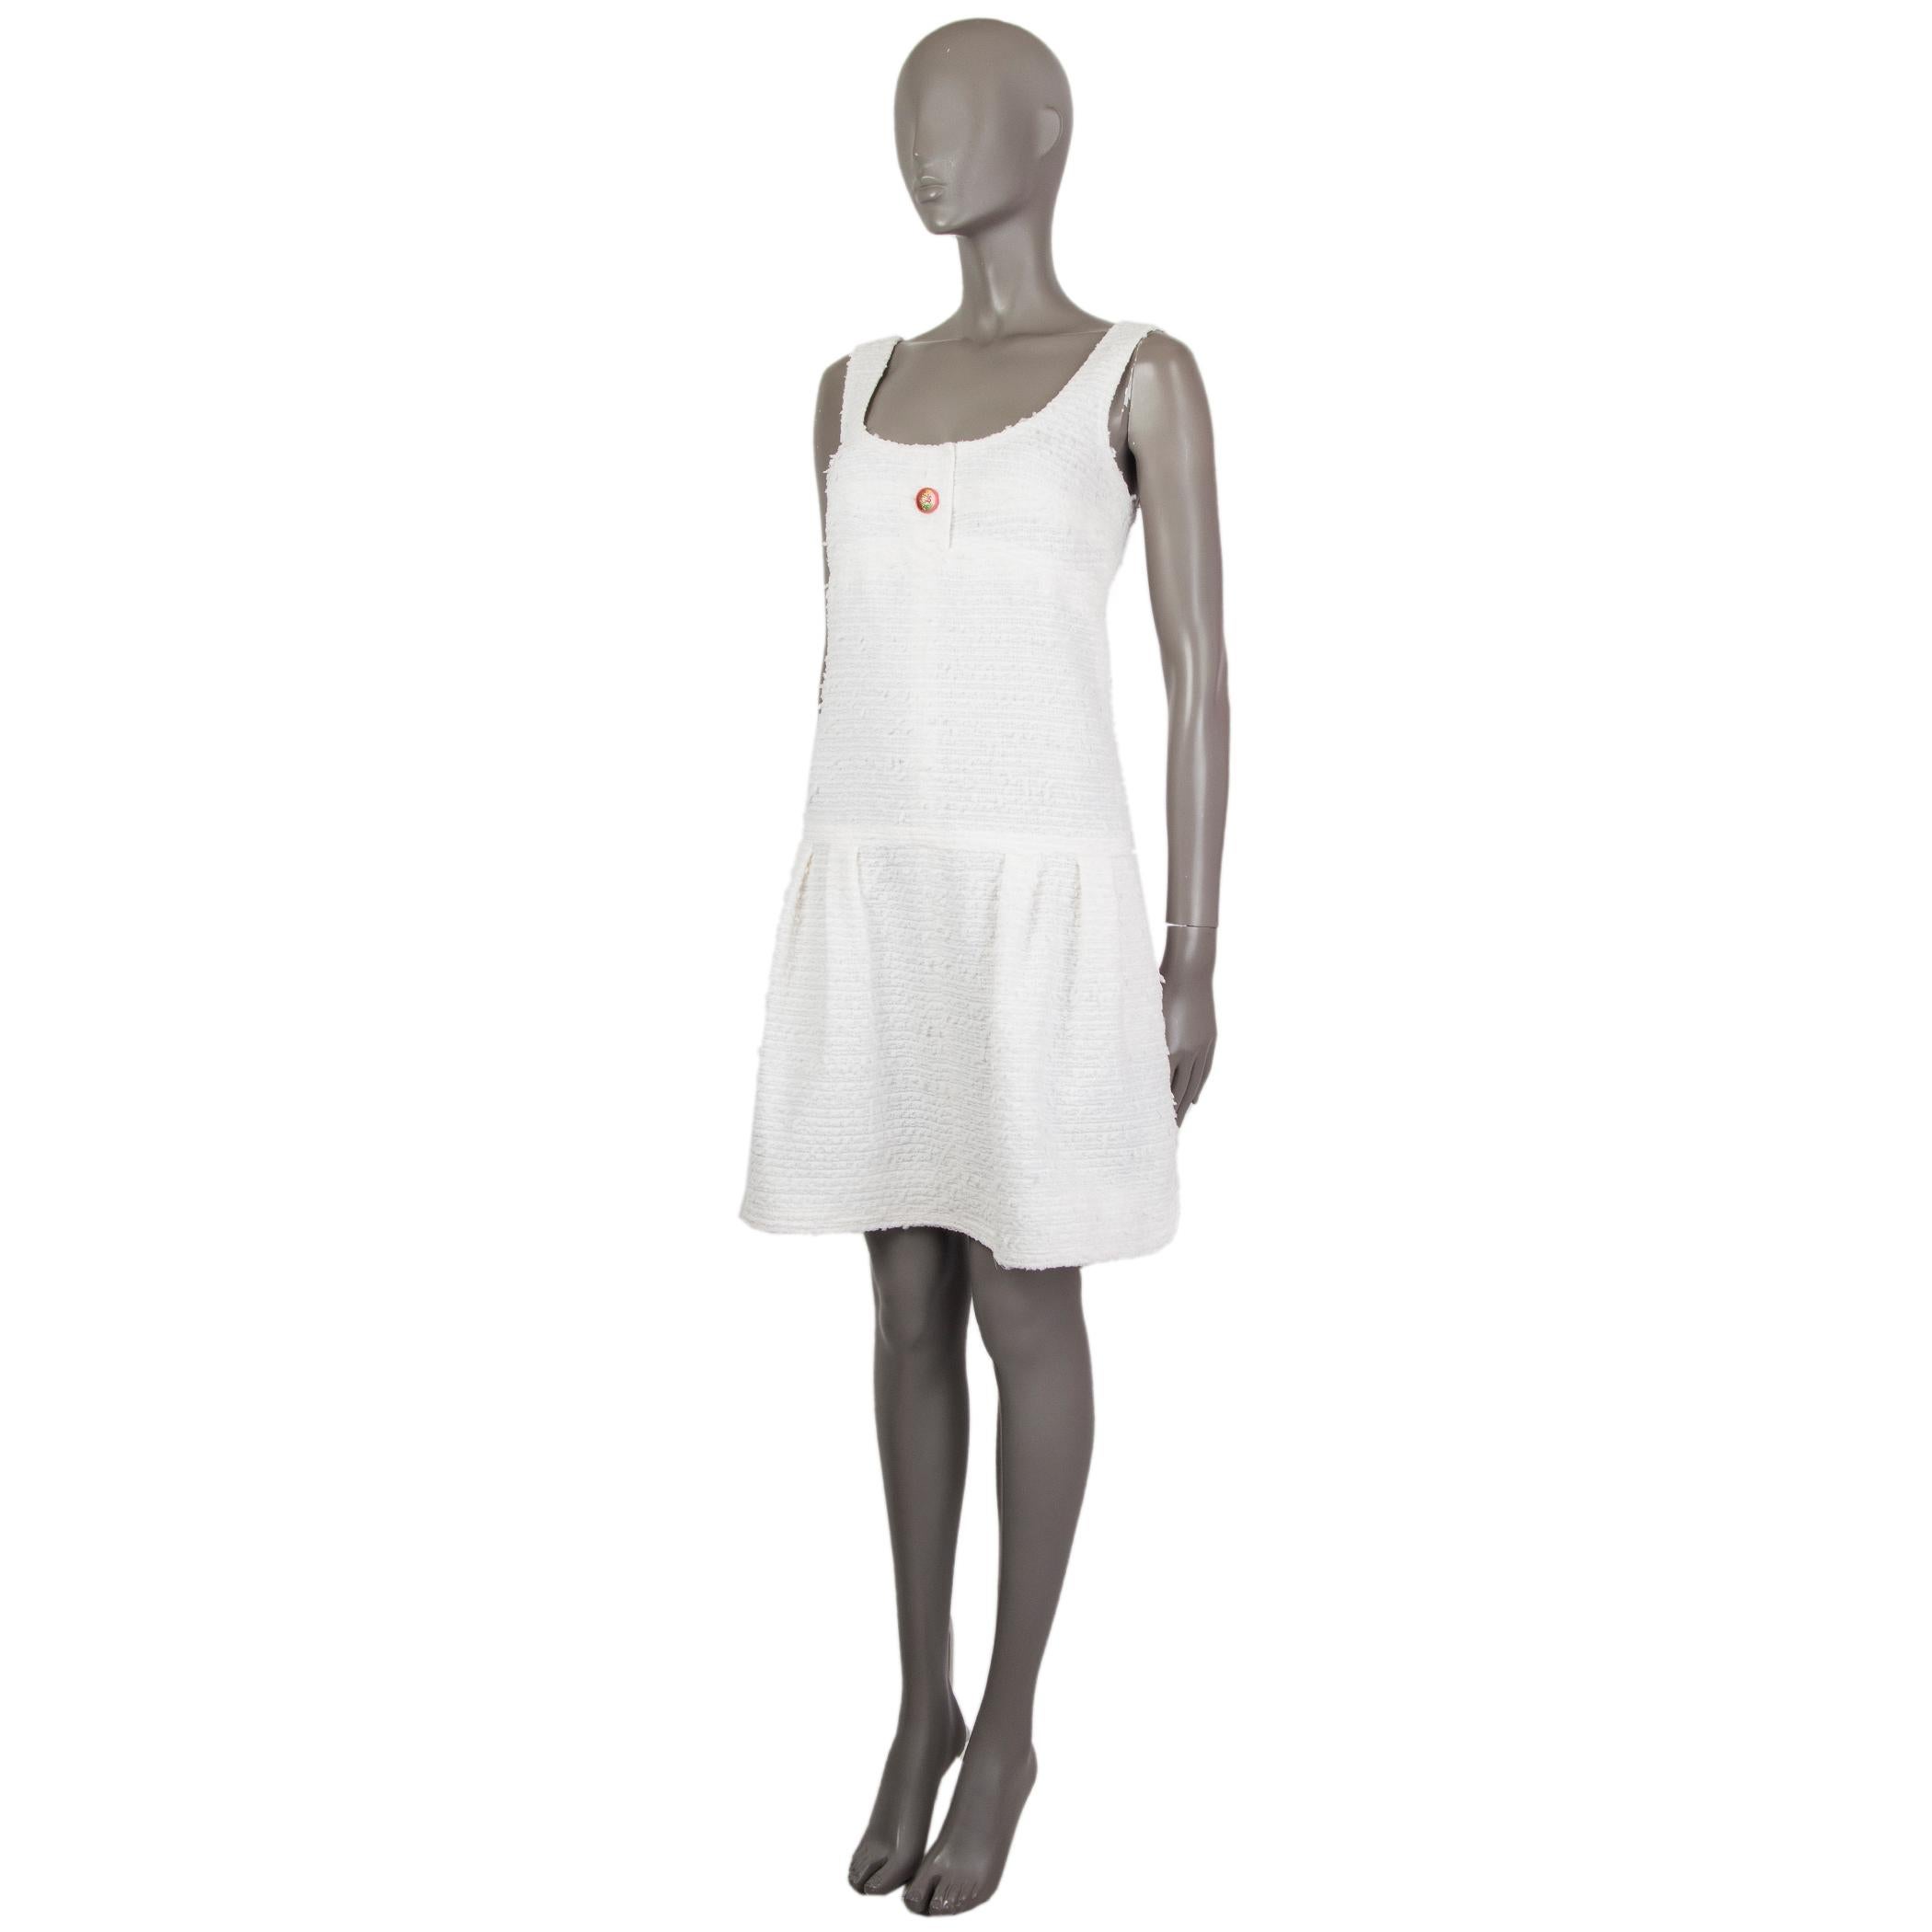 Chanel tweed pinafore dress in off-white polyamide (58%), cotton (31%) and wool (11%) with a round neck. Has side pockets. Closes on the front with a pink button and on the back with a concealed zipper. Lined in cotton (75%) and silk (25%). Has been